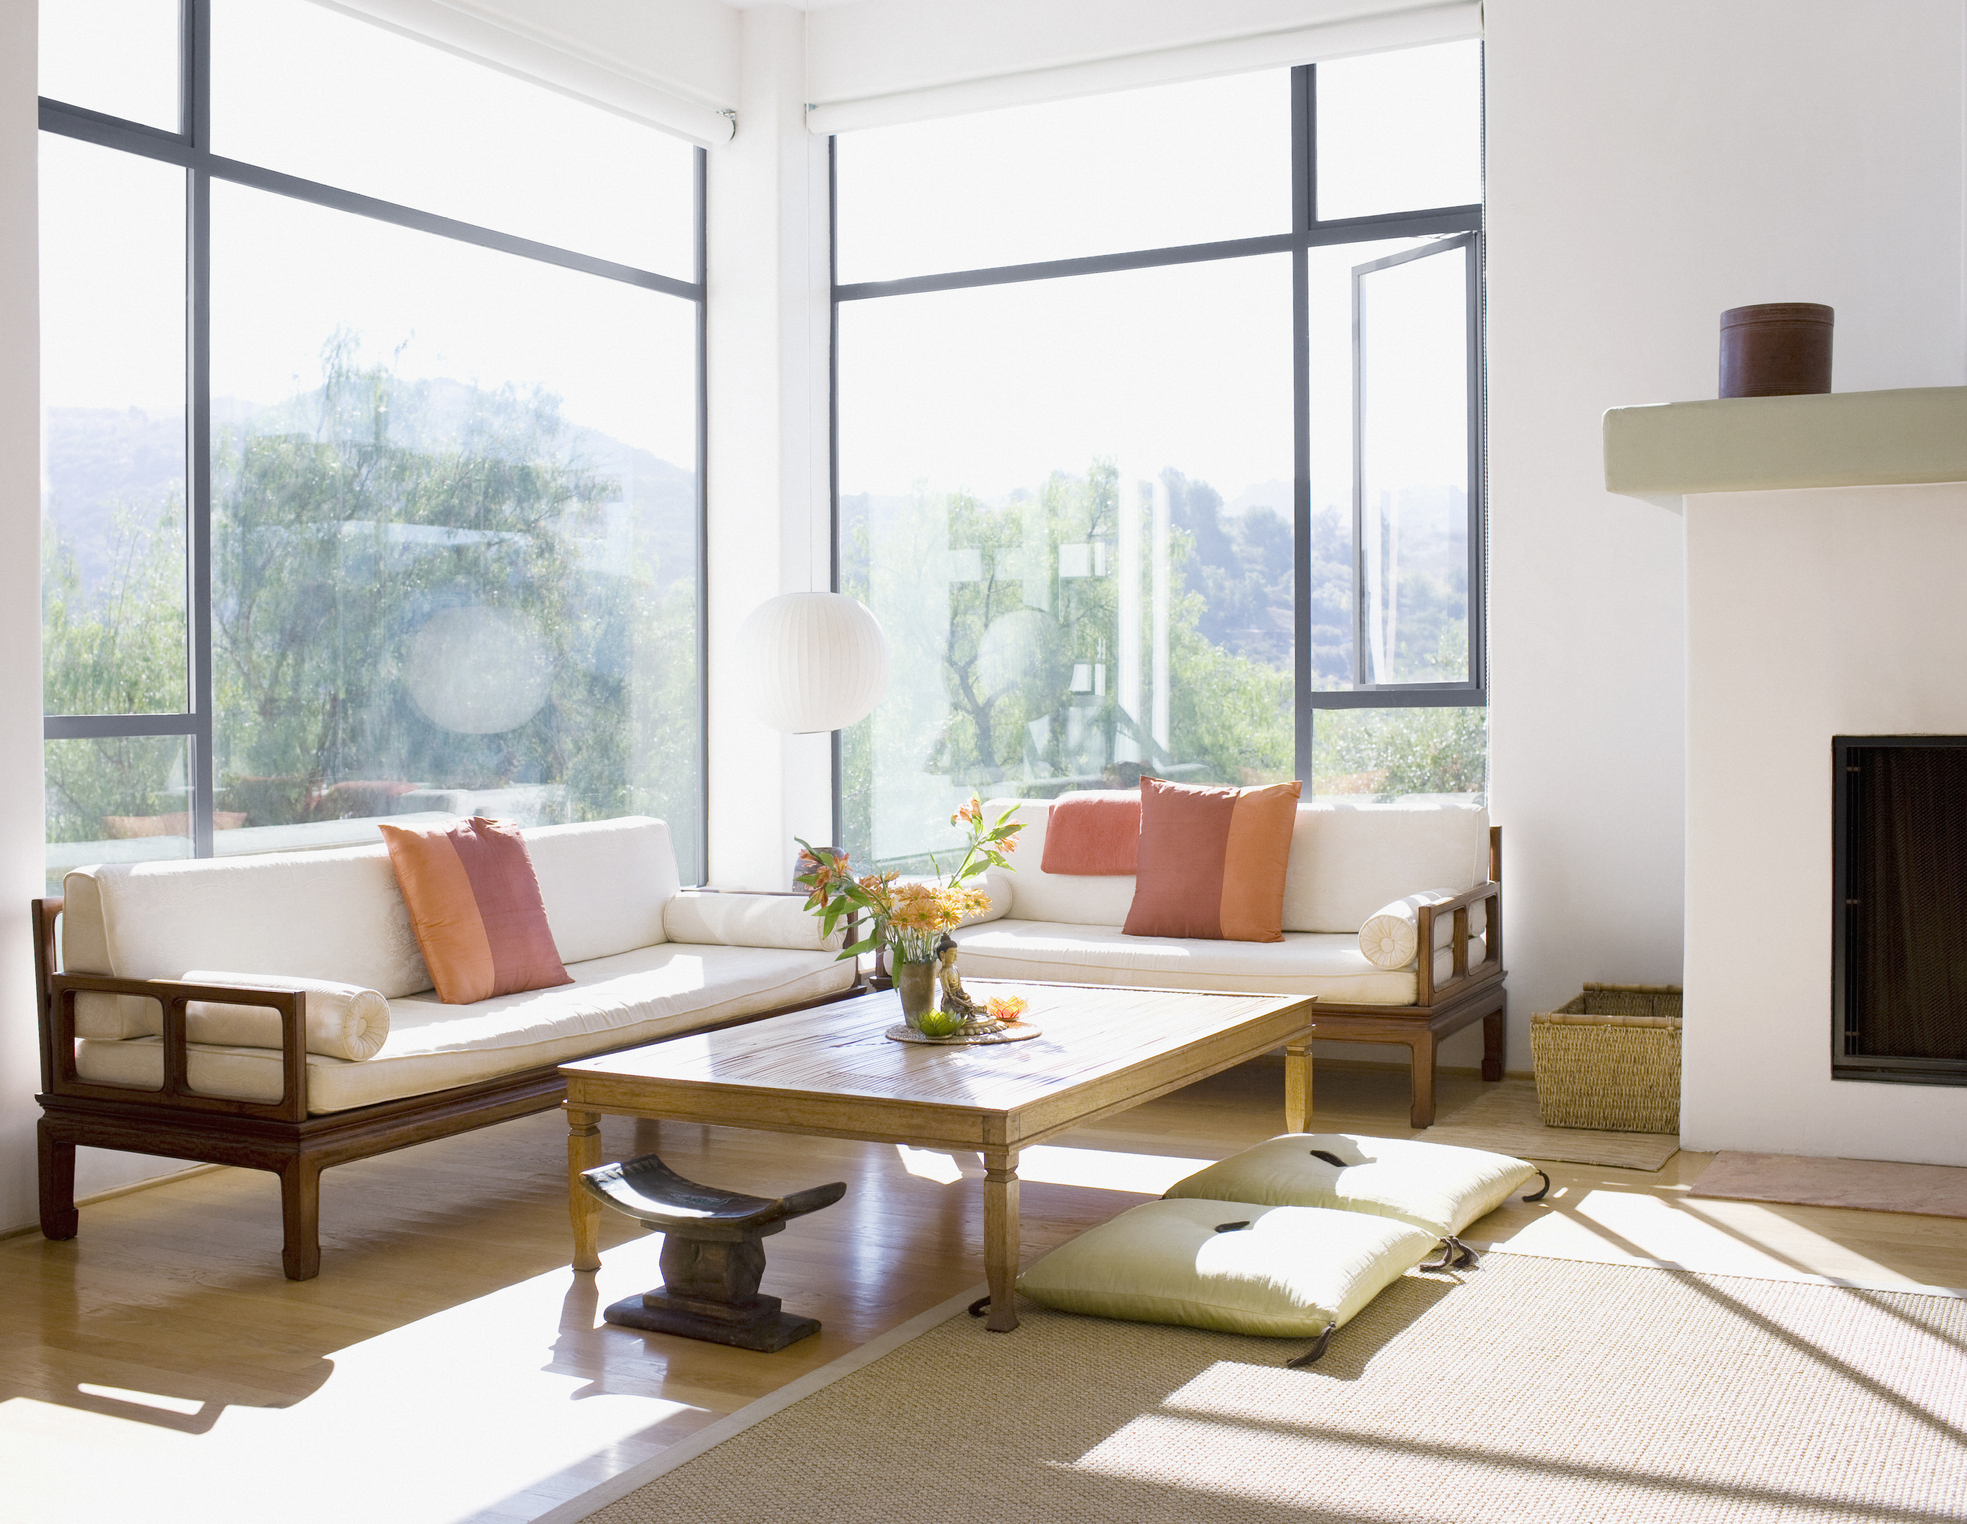 A living room with the sun pouring in through the windows.